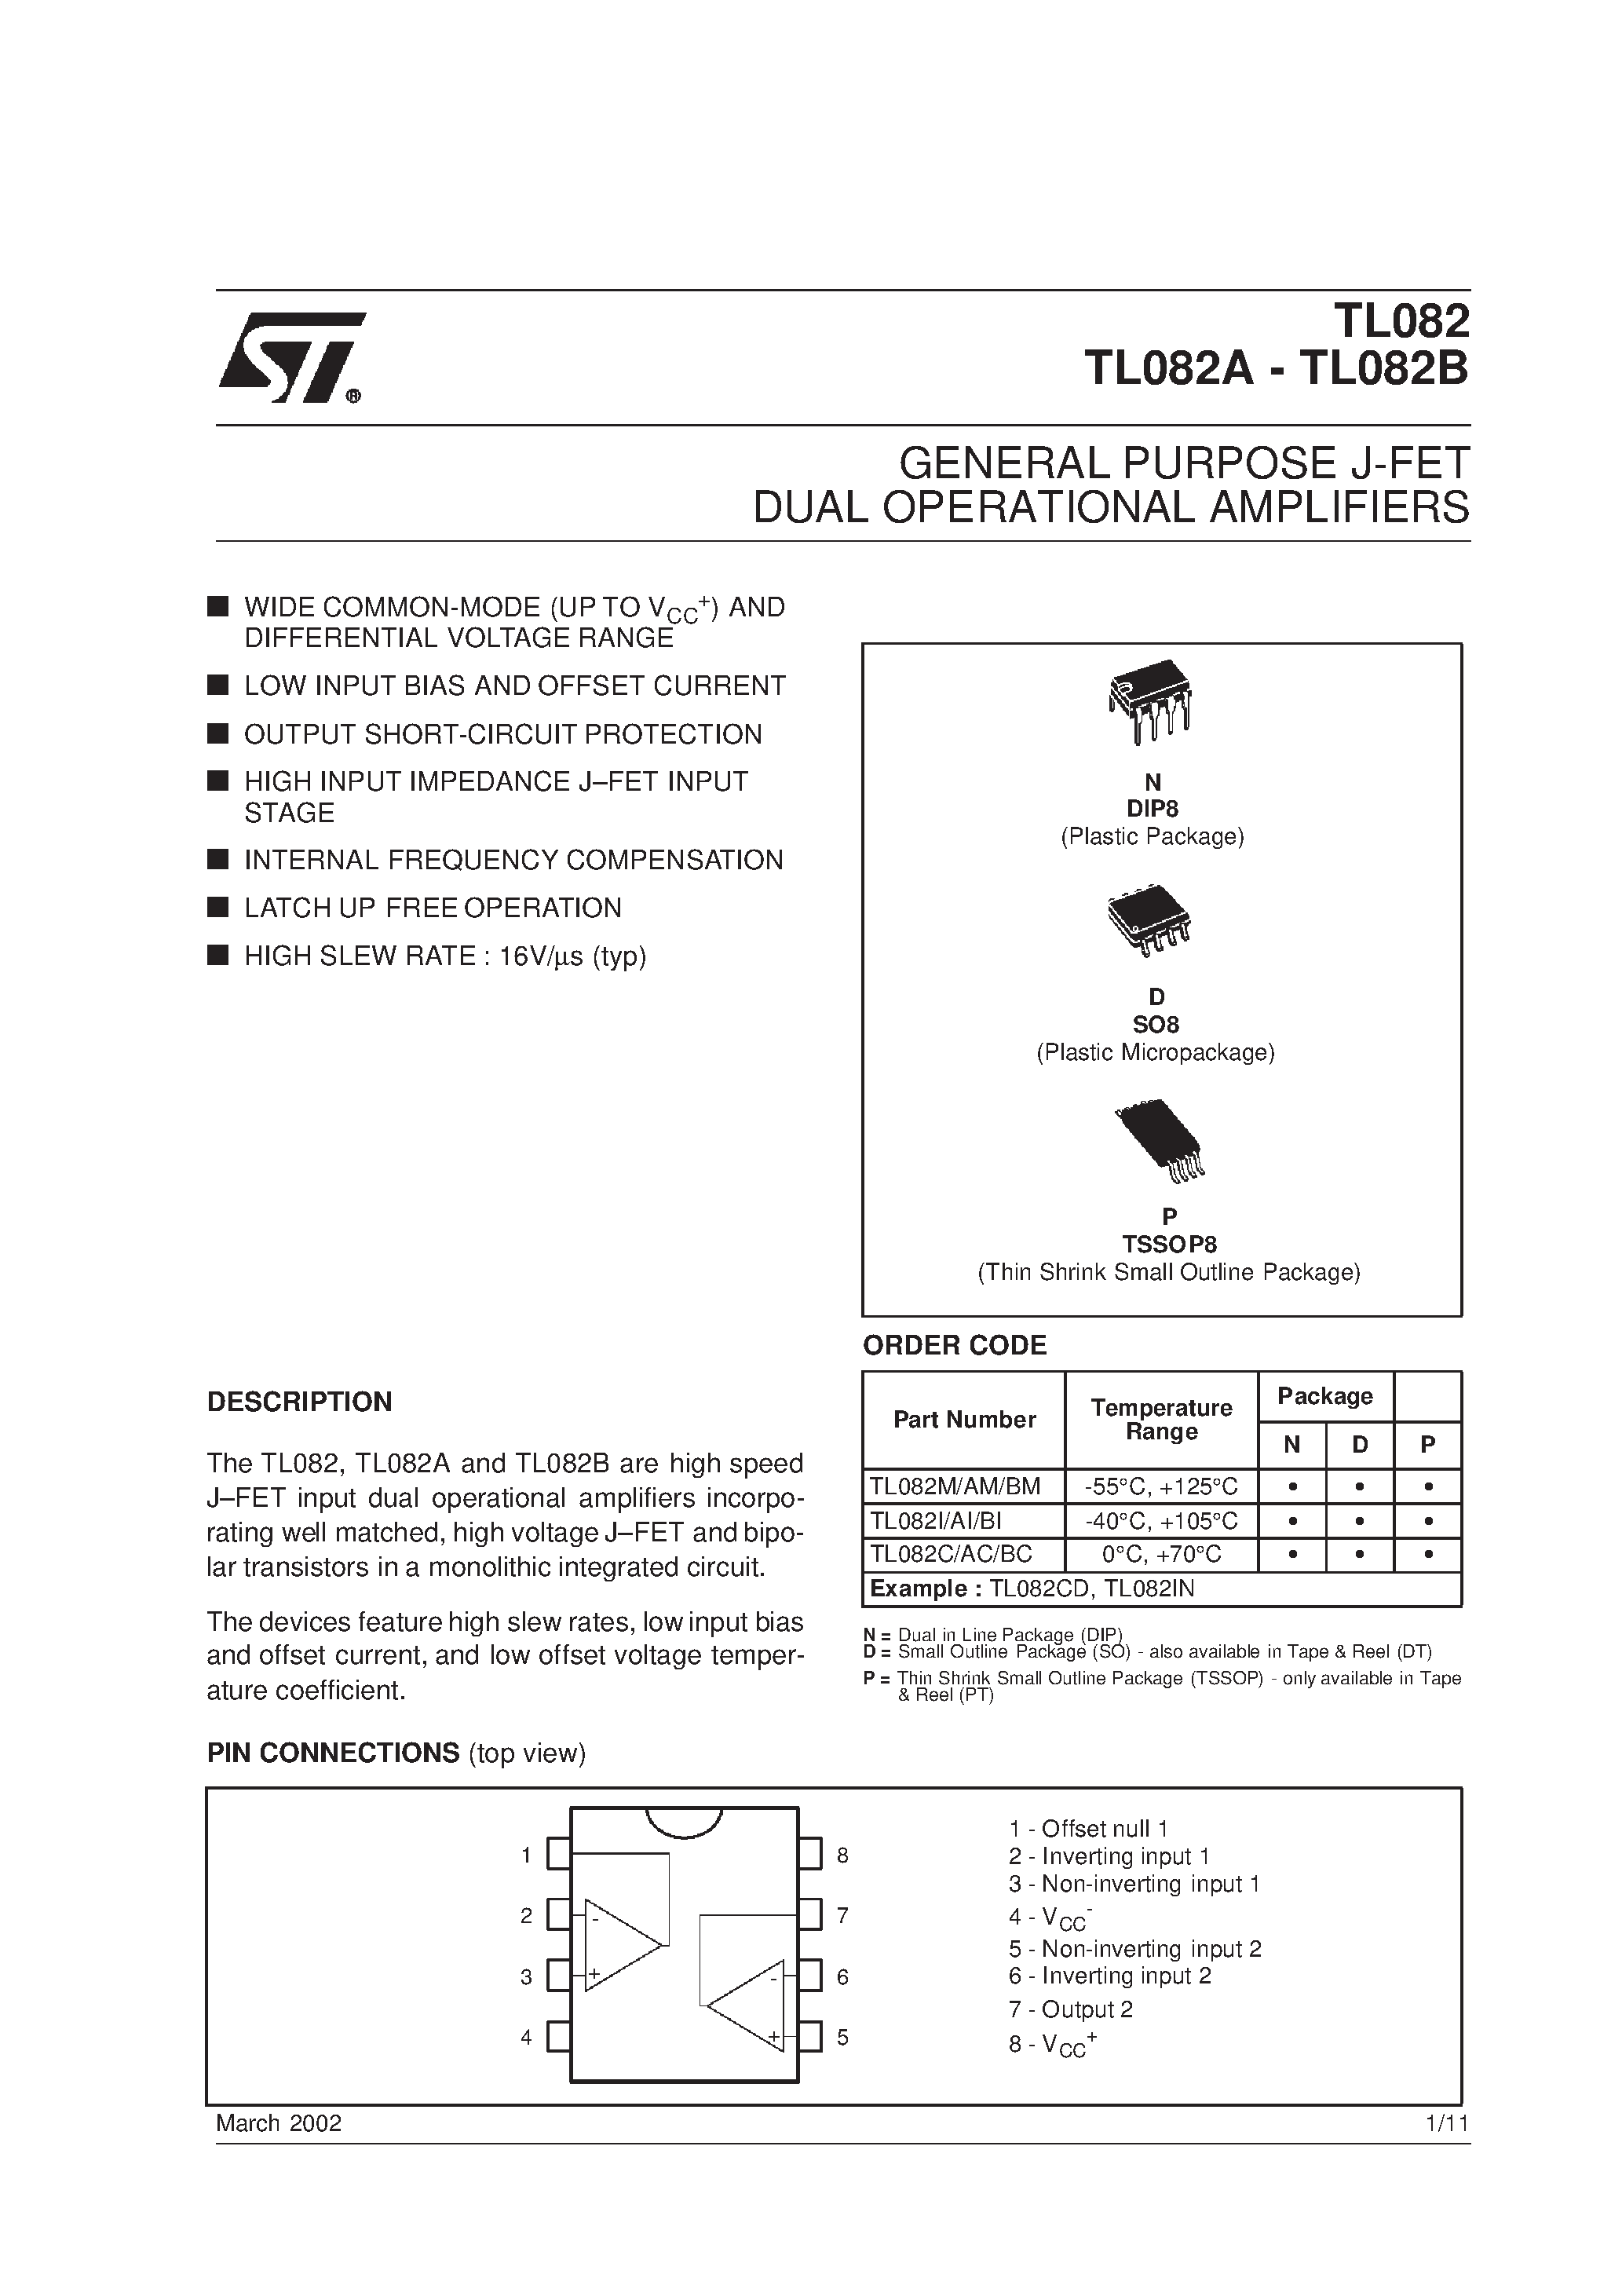 Datasheet TL082BC - GENERAL PURPOSE J-FET DUAL OPERATIONAL AMPLIFIERS page 1